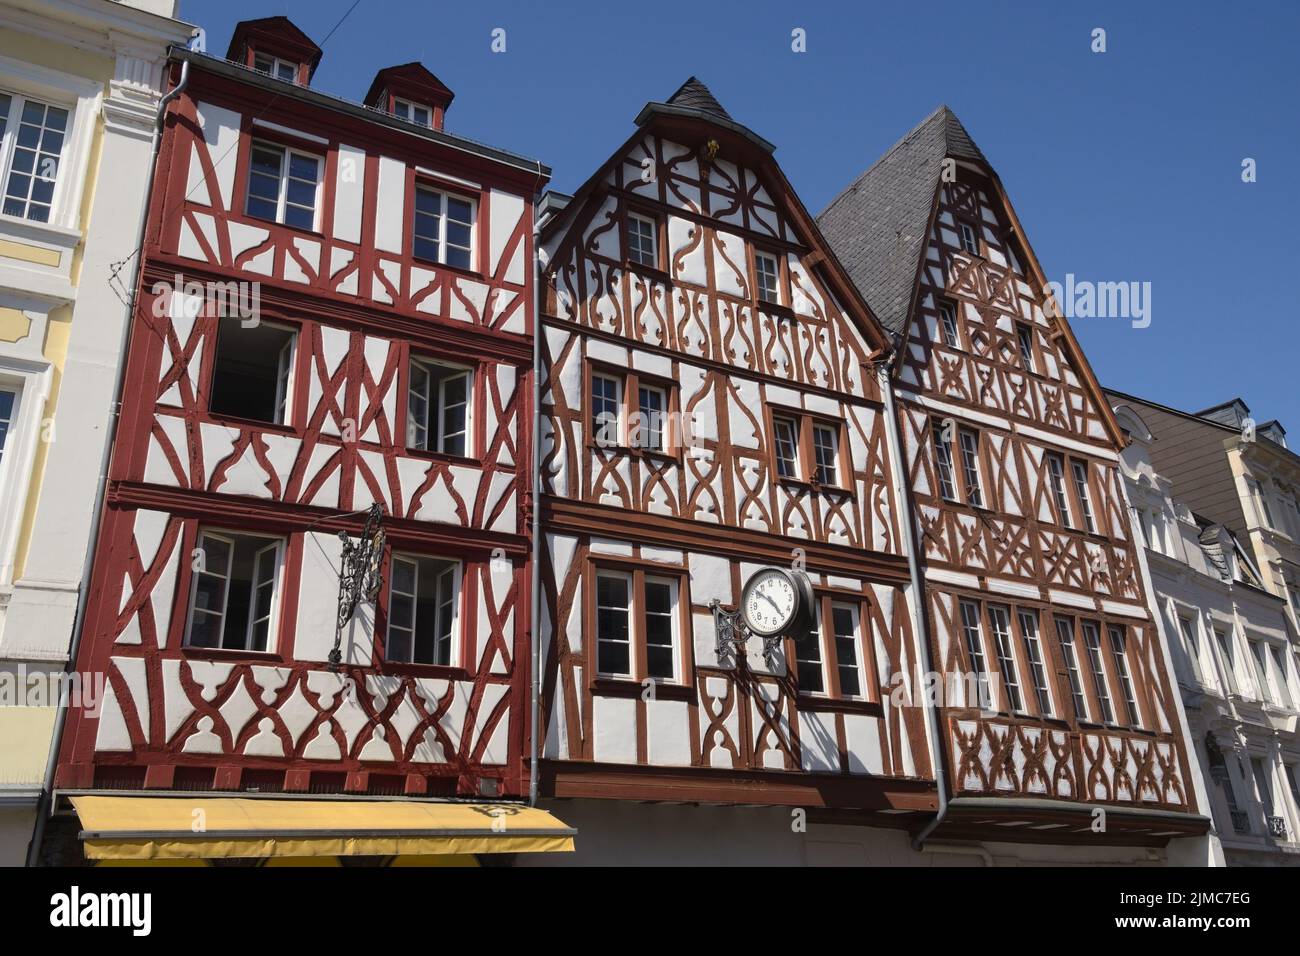 Trier - Half-timbered houses from the Renaissance, Germany Stock Photo